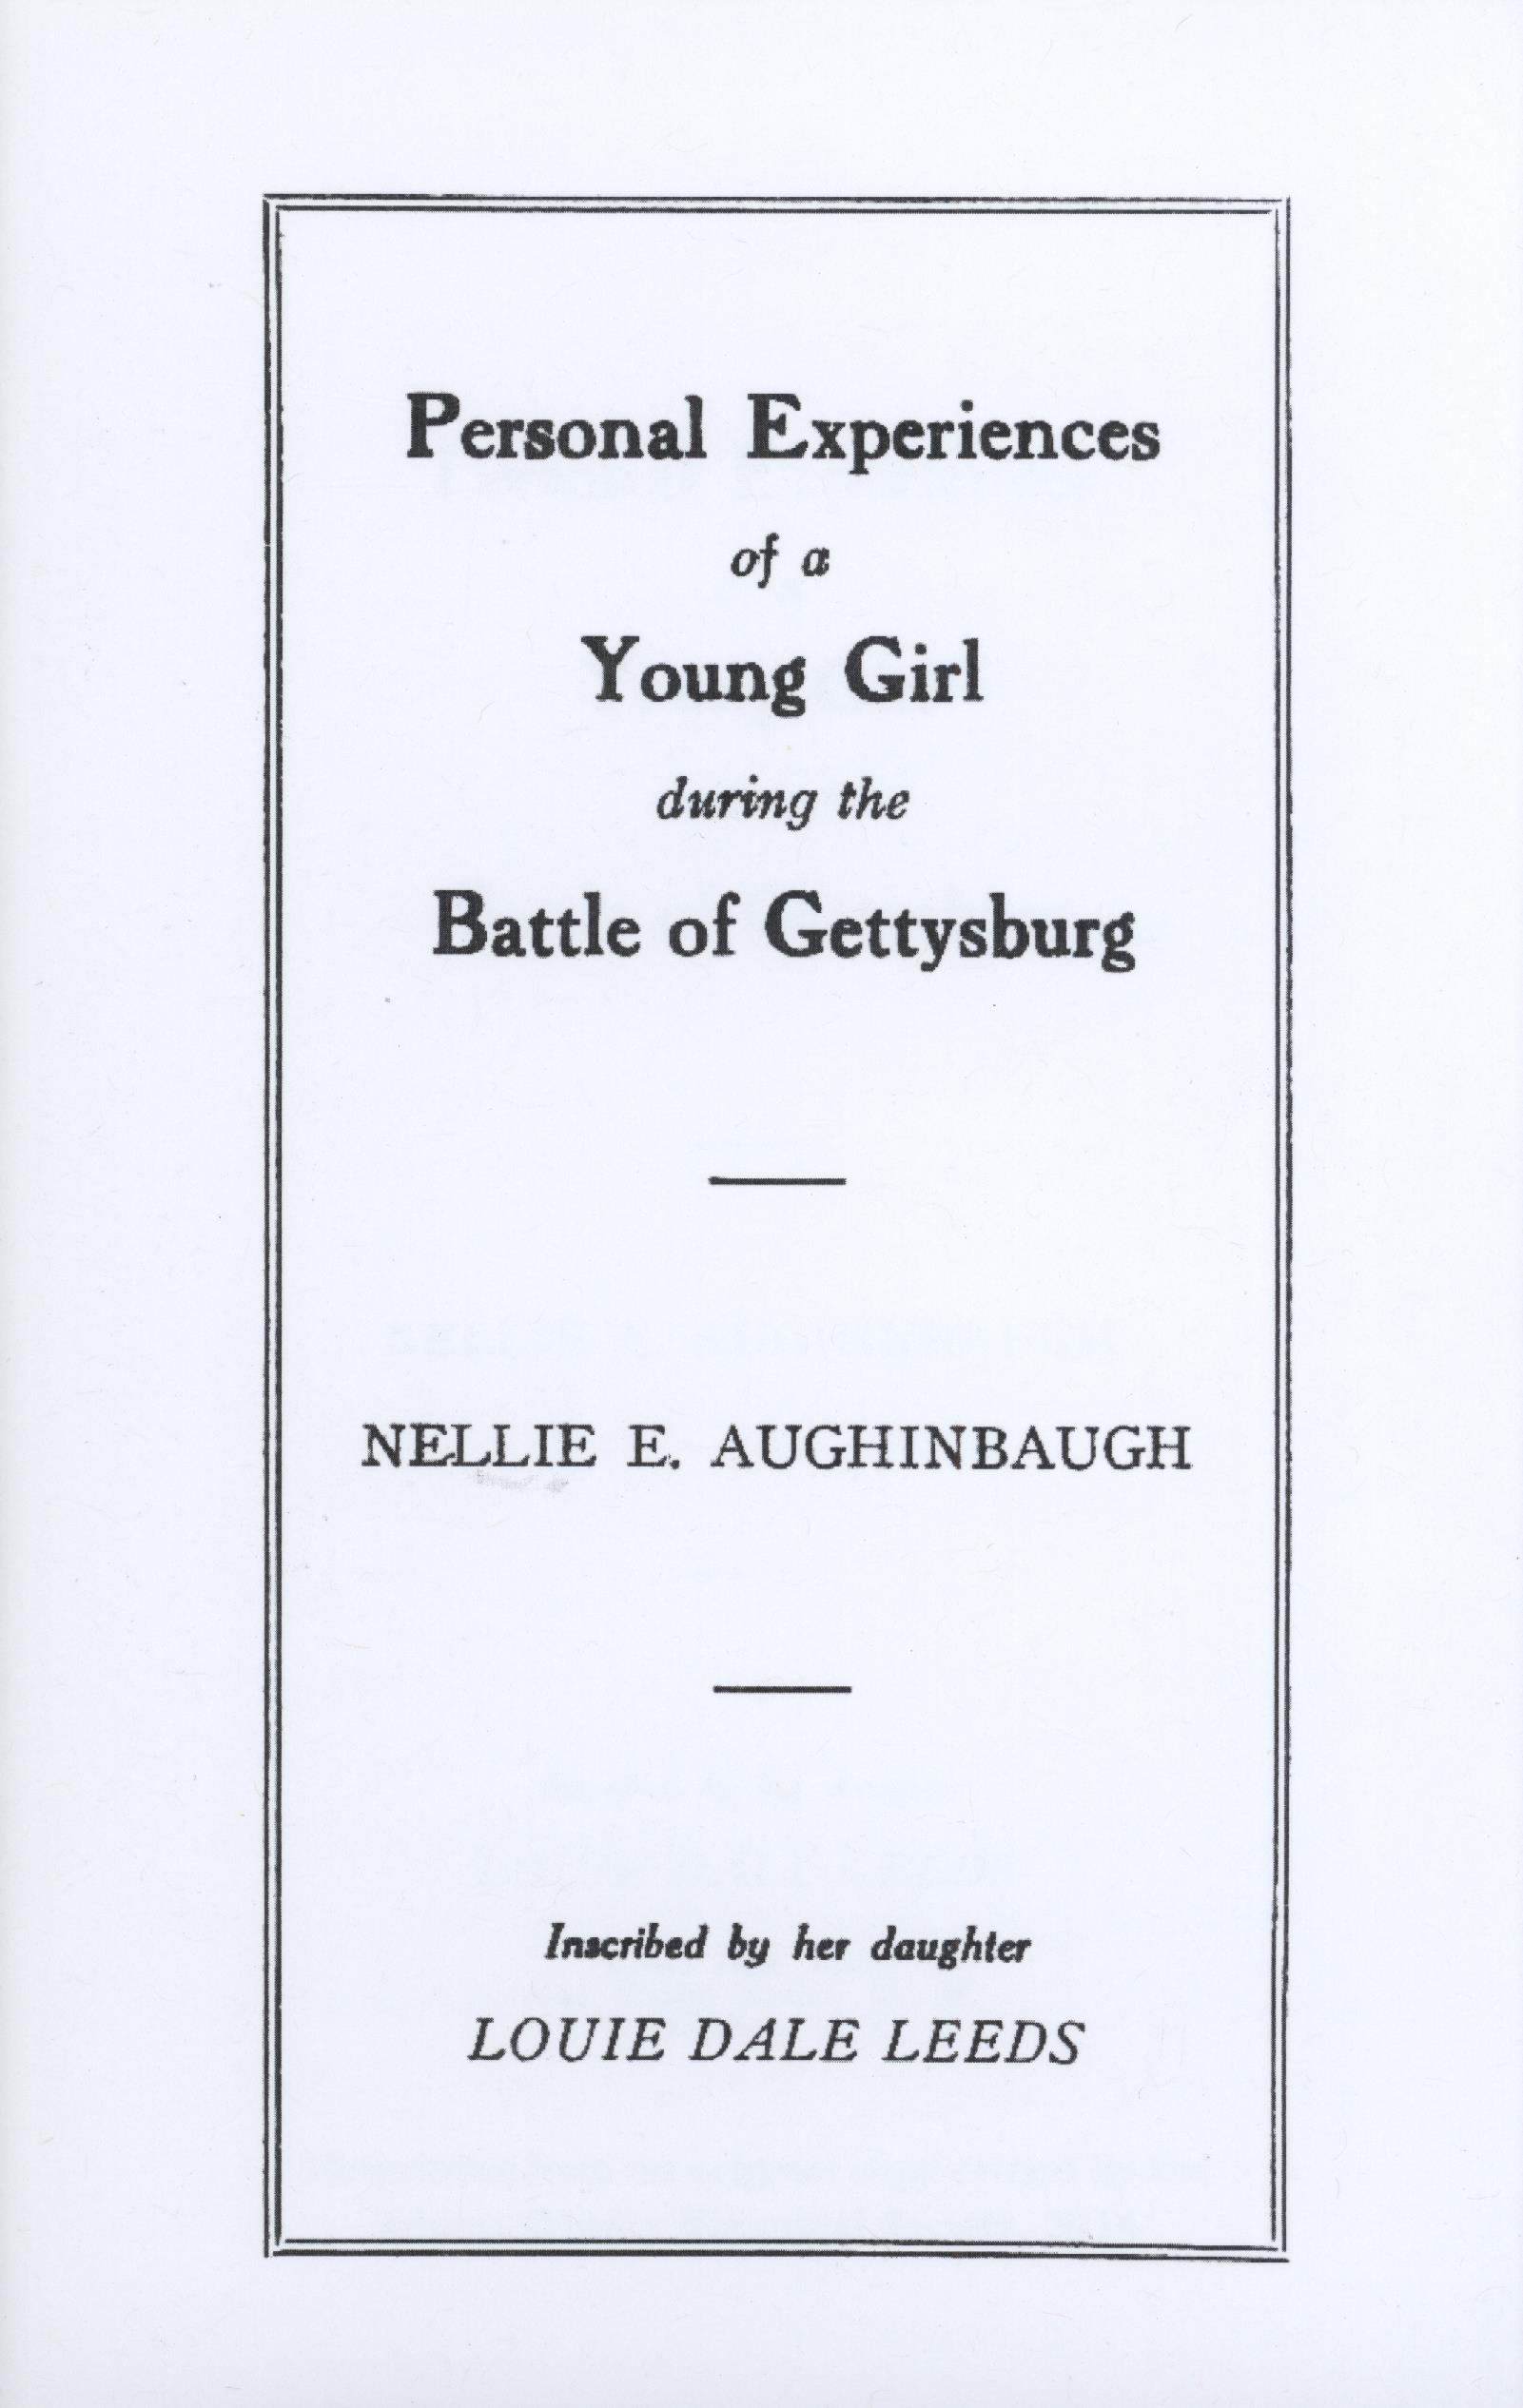 Personal Experiences of a Young Girl During the Battle of Gettysburg